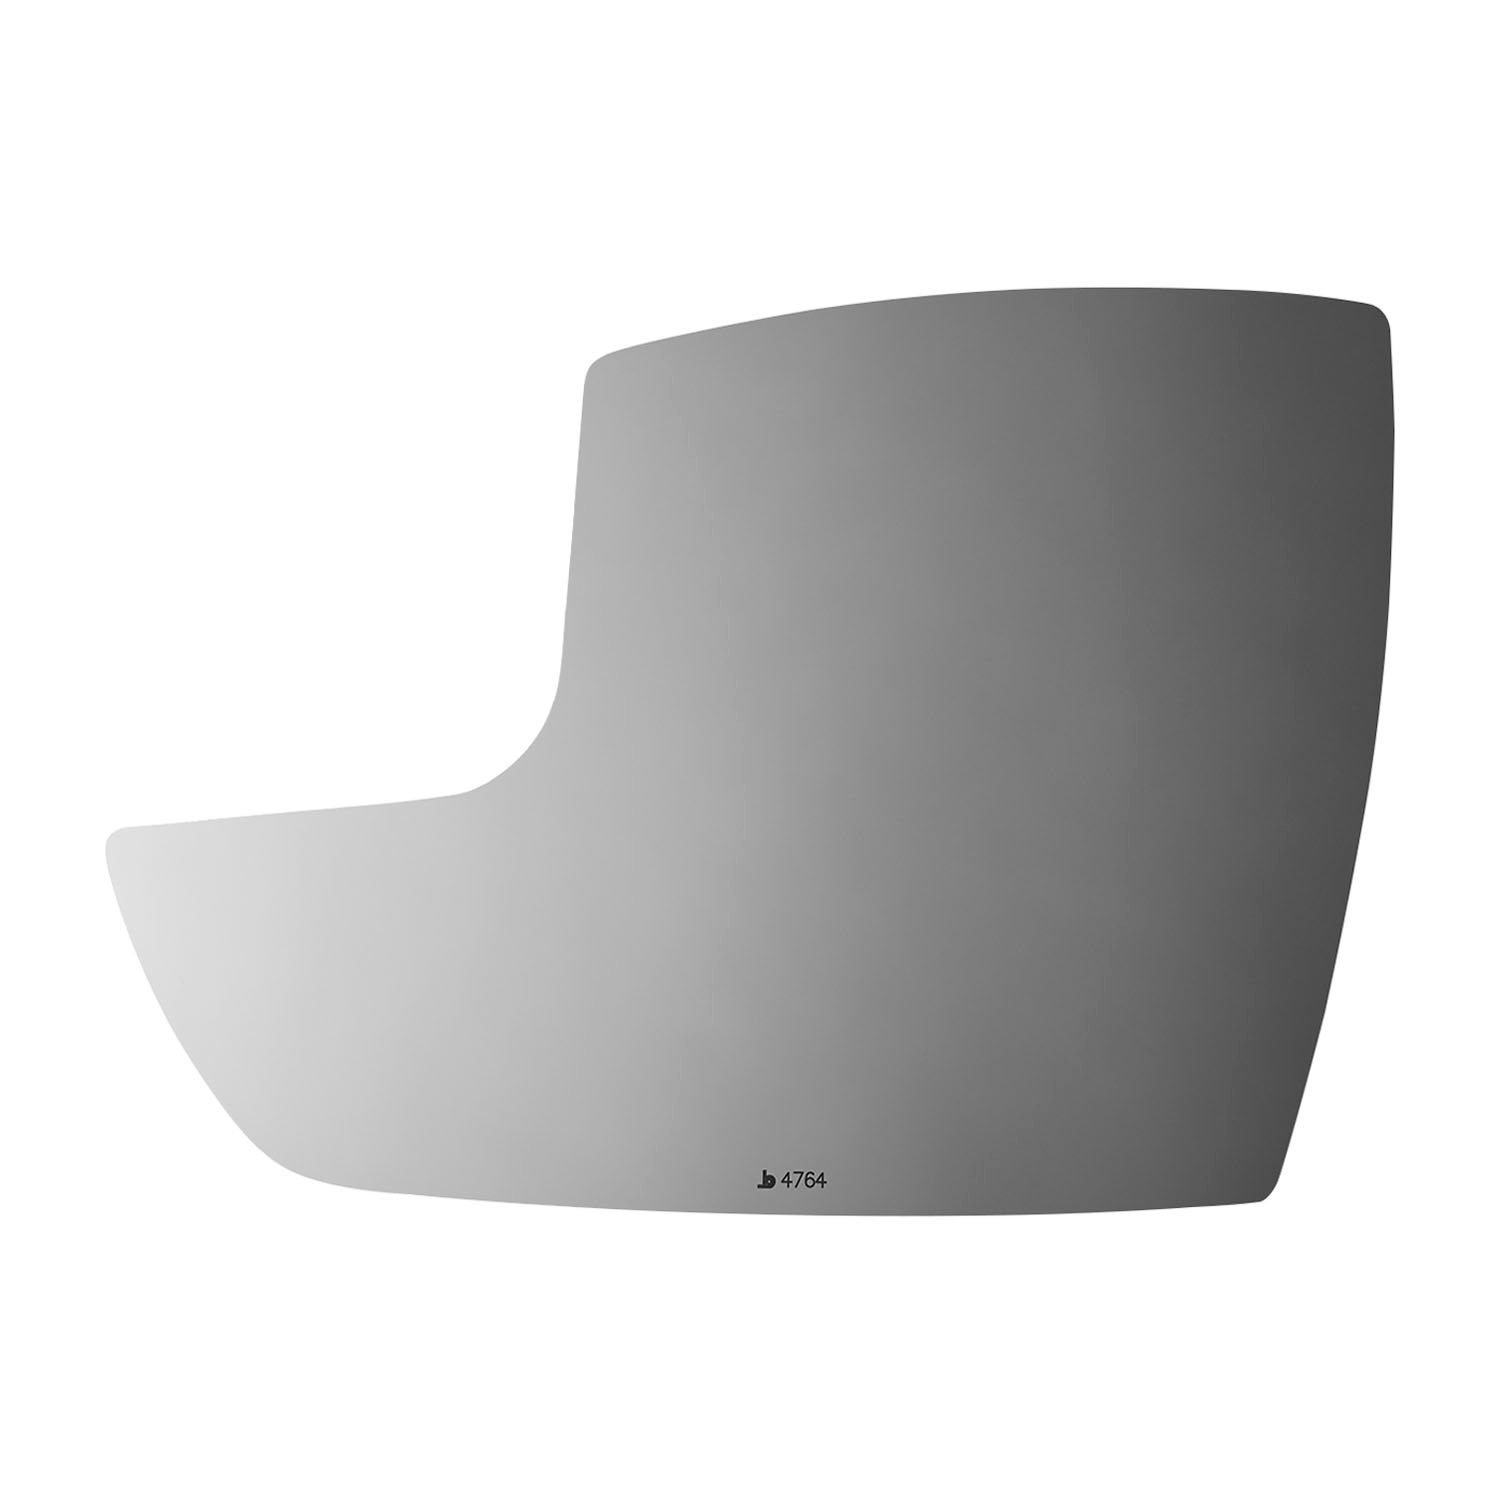 4764 SIDE VIEW MIRROR